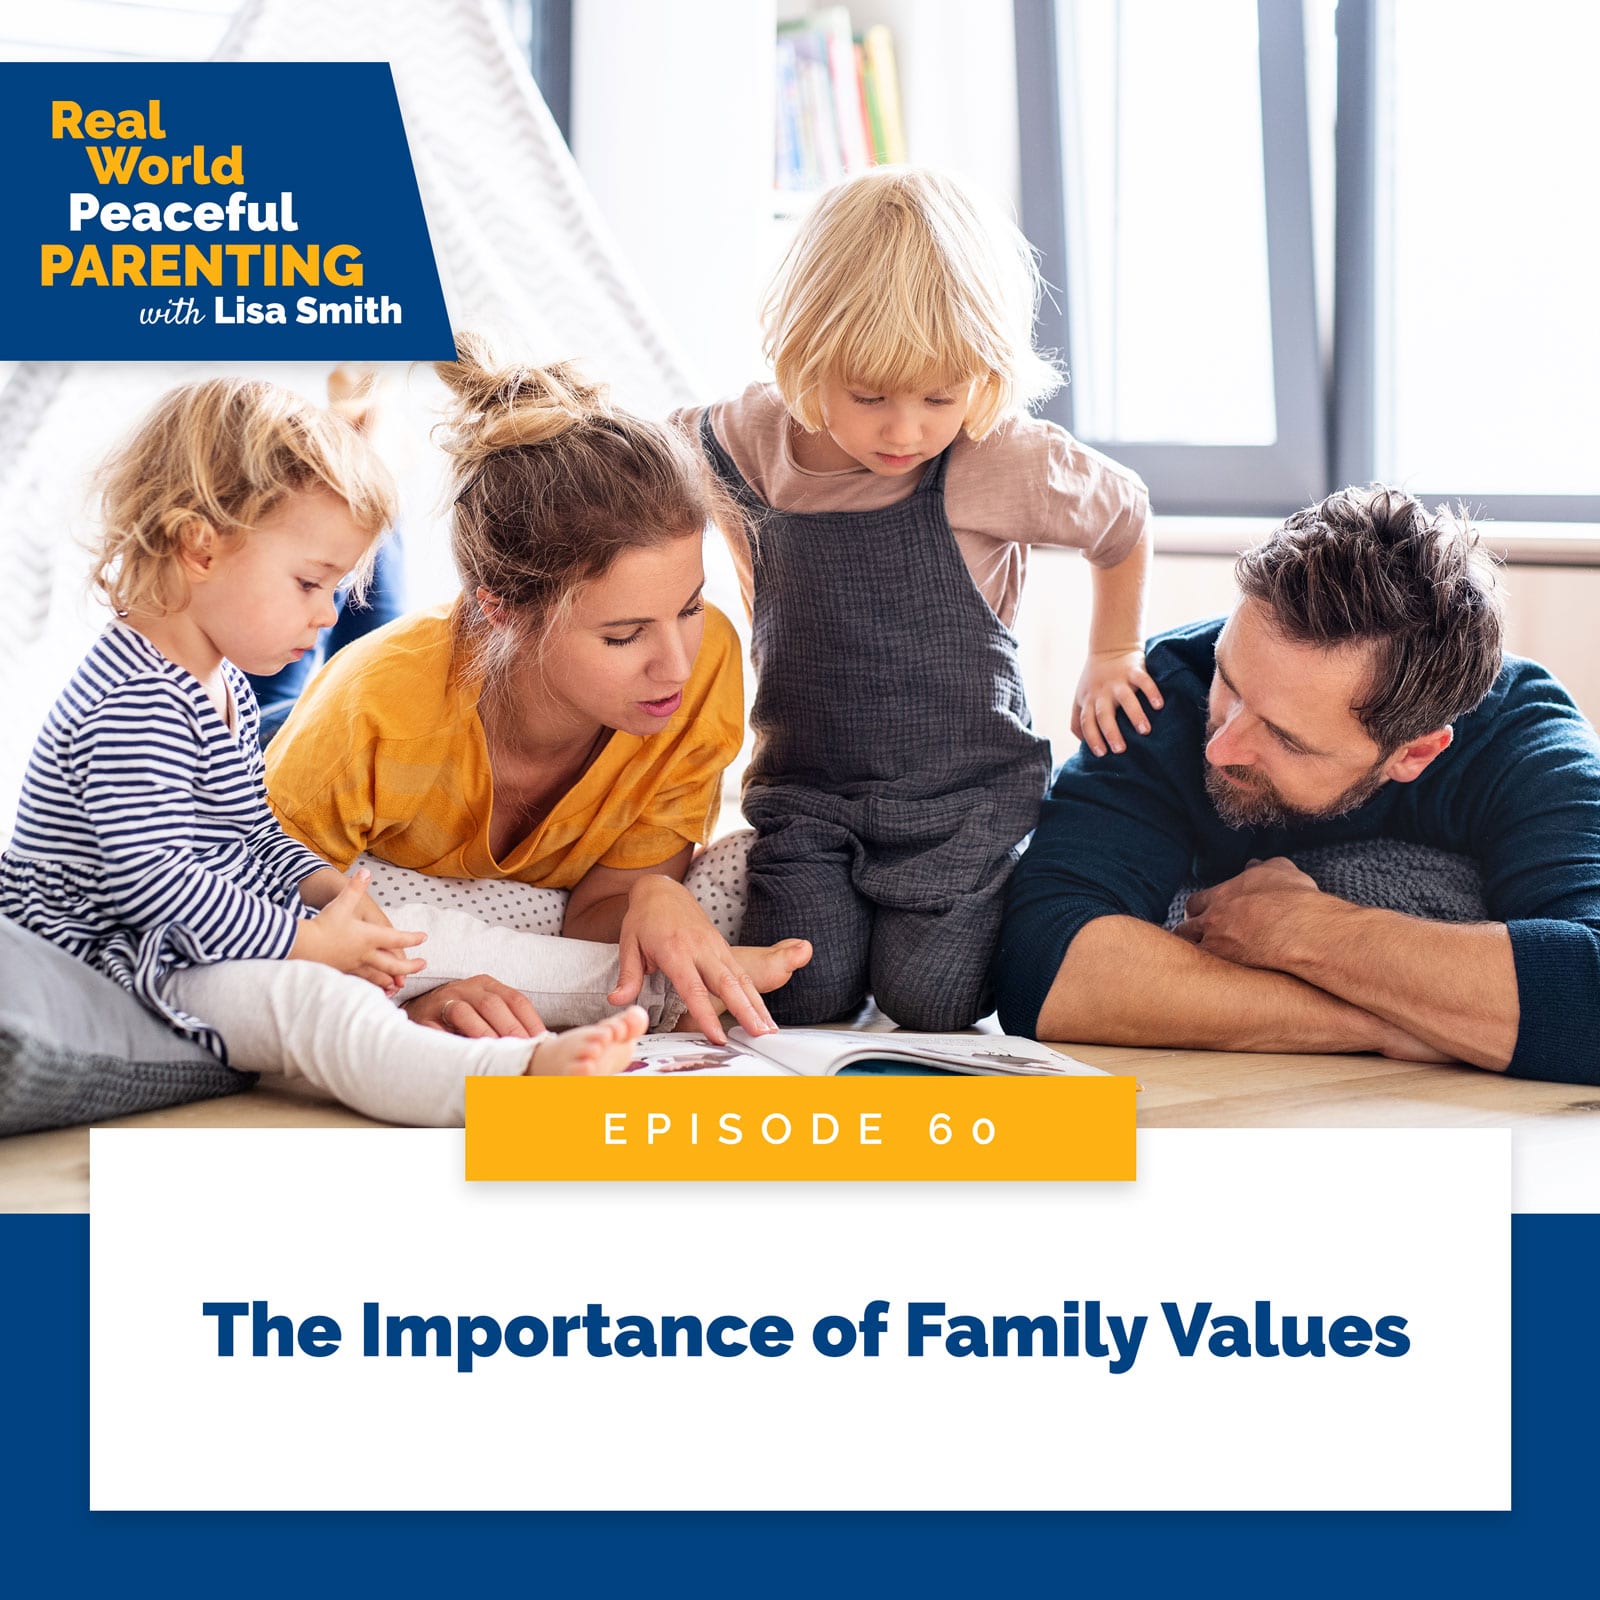 Real World Peaceful Parenting with Lisa Smith | The Importance of Family Values